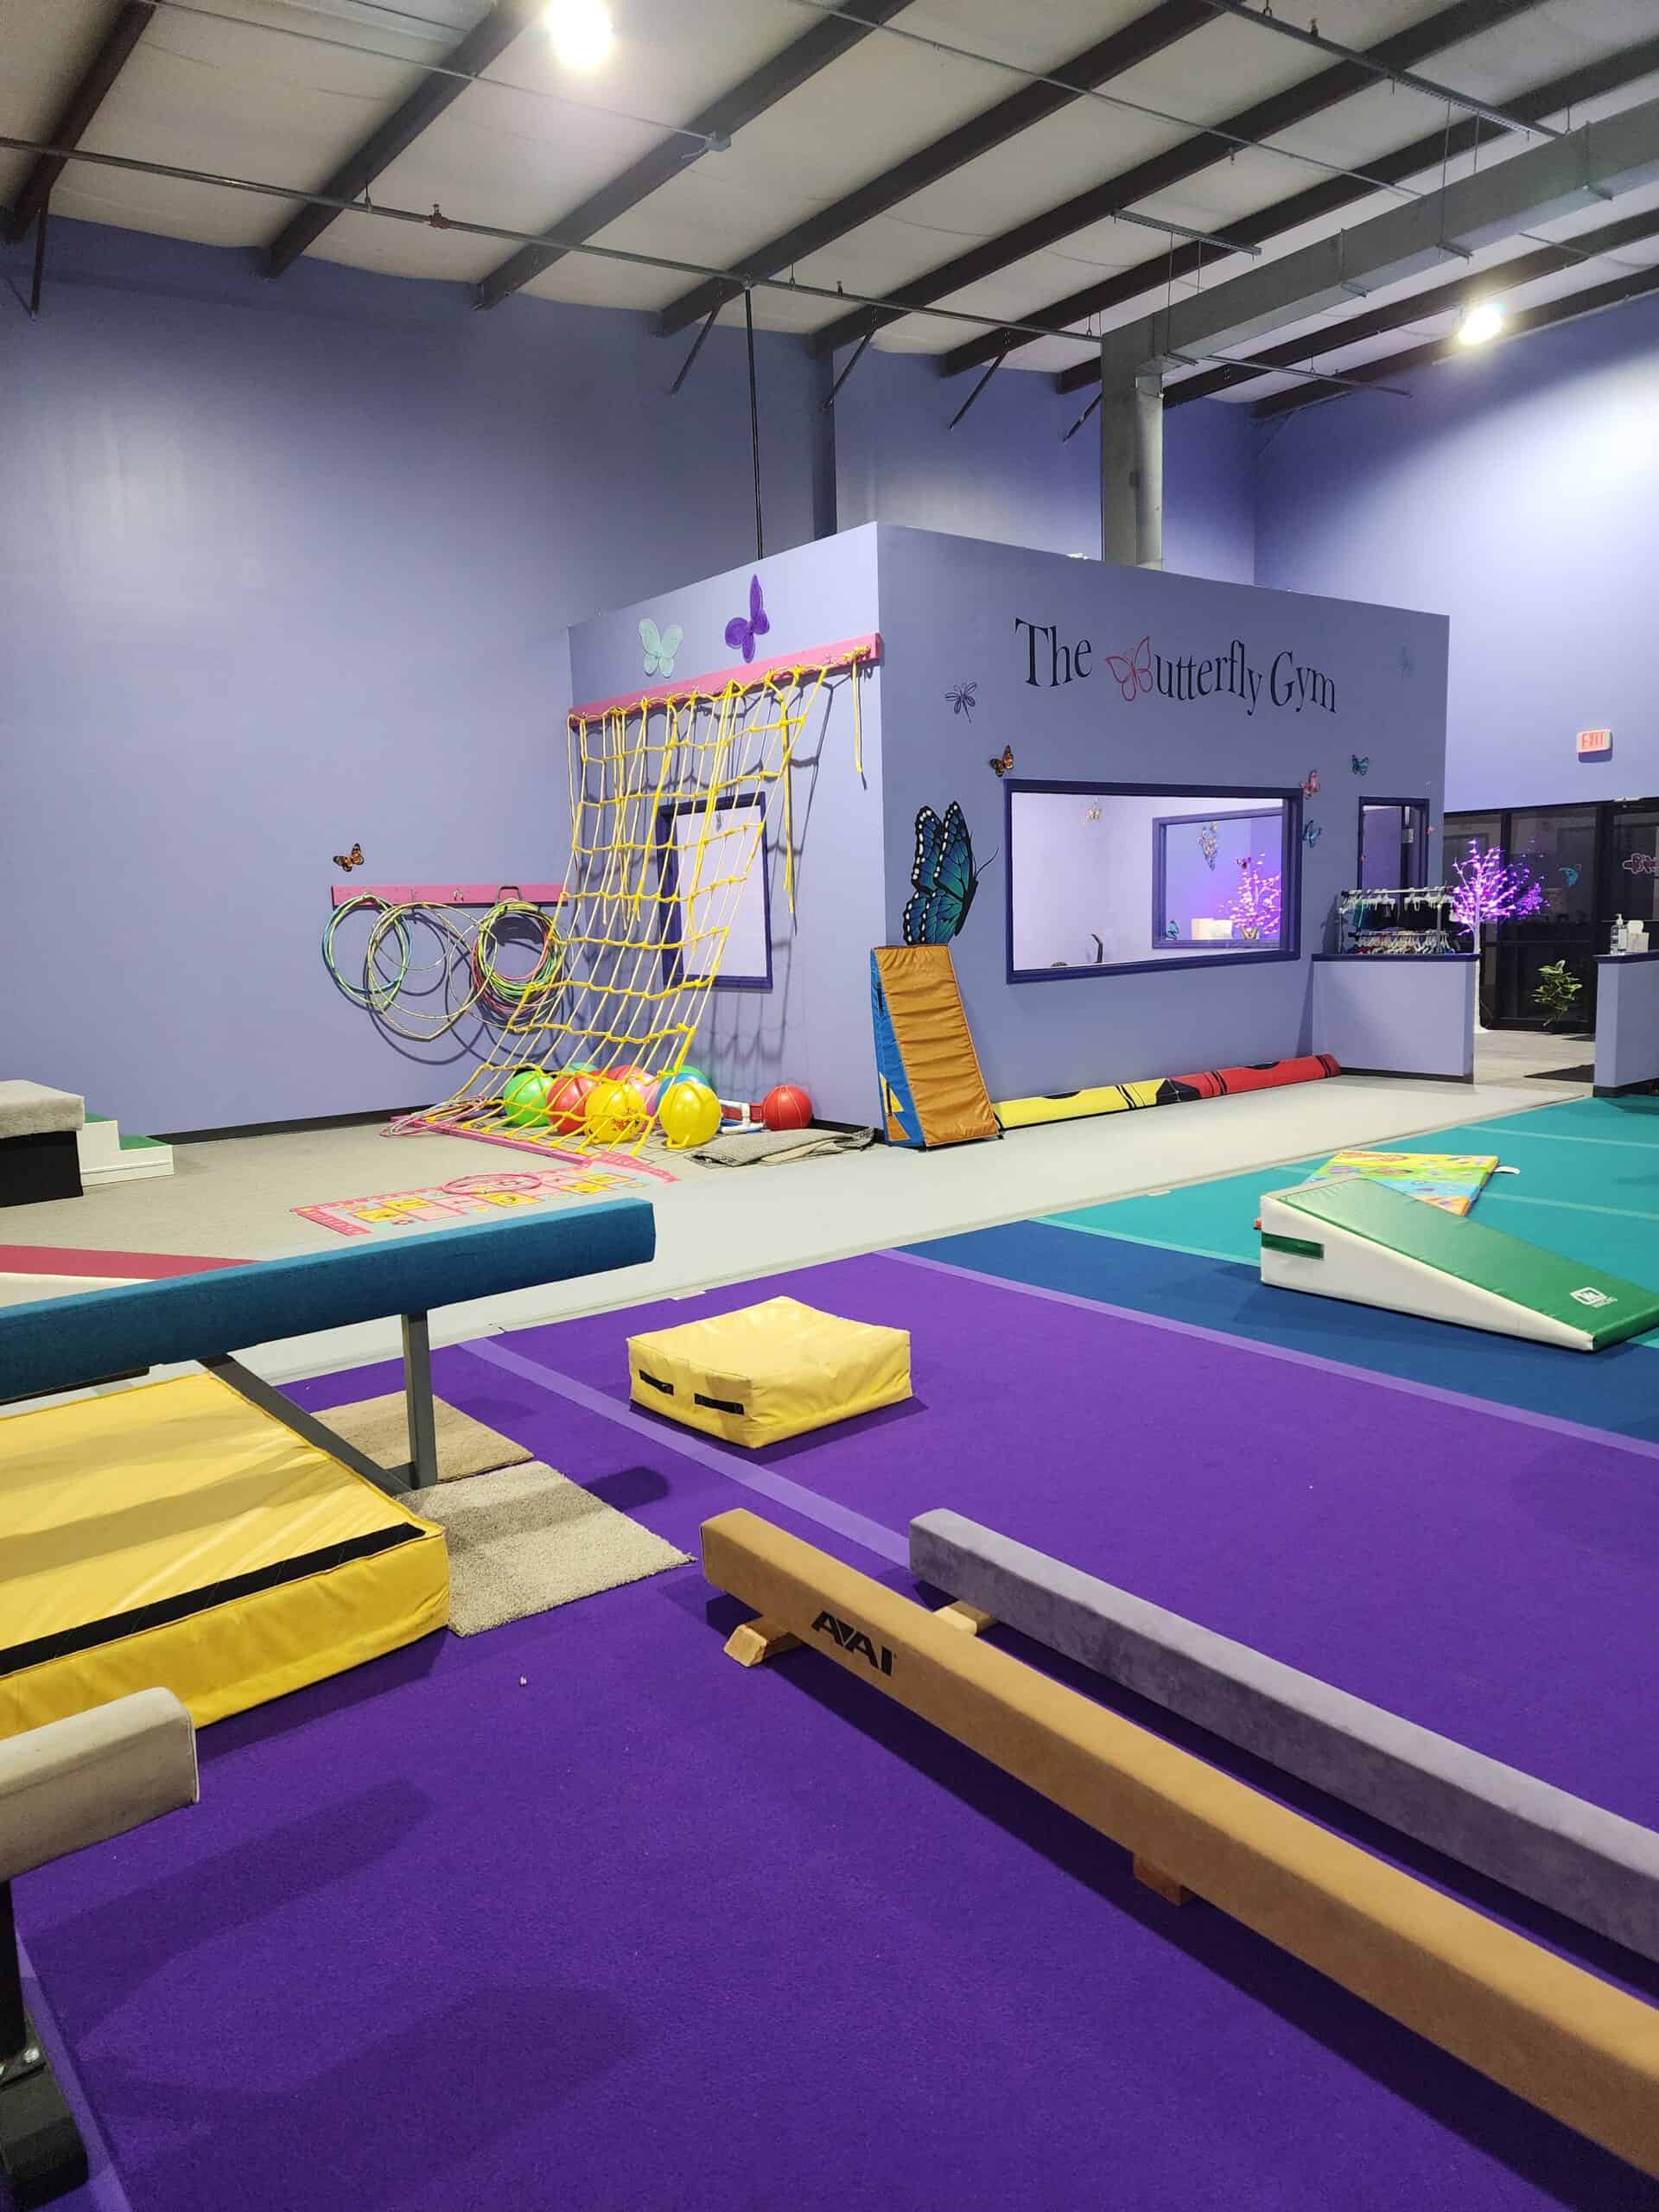 An inviting indoor children's play area named 'The Butterfly Gym' offers a variety of equipment for active play, including a climbing net, balance beams, and colorful mats, all designed to encourage physical development and fun.